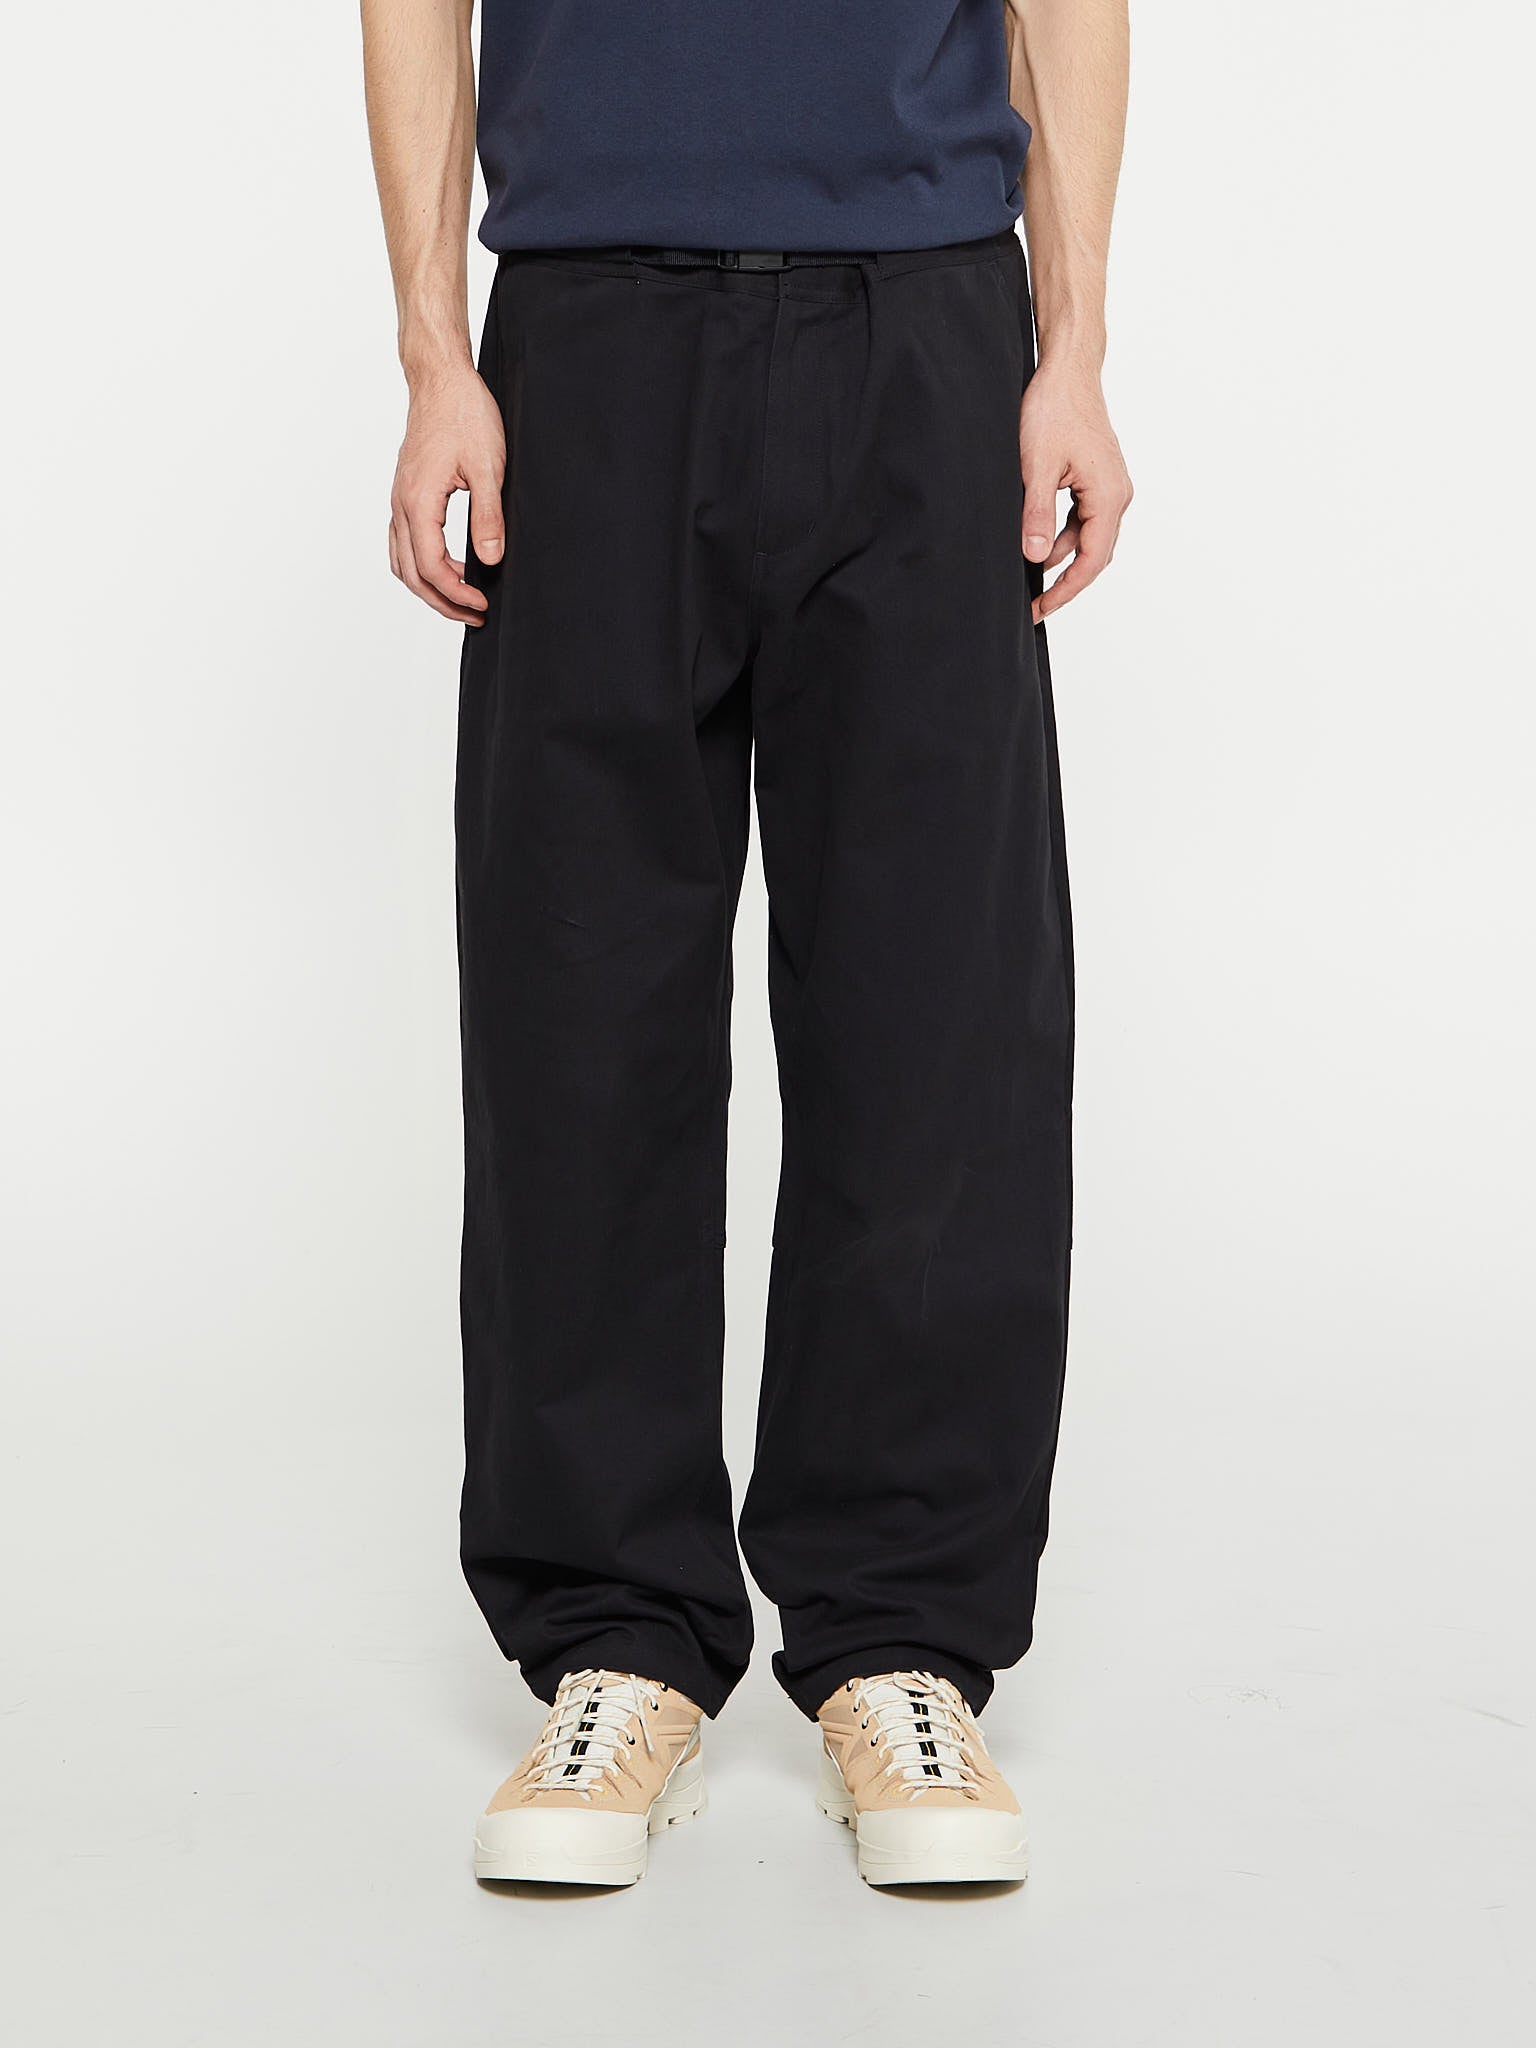 Pas Normal Studios - Off-Race Cotton Twill Pants in Black